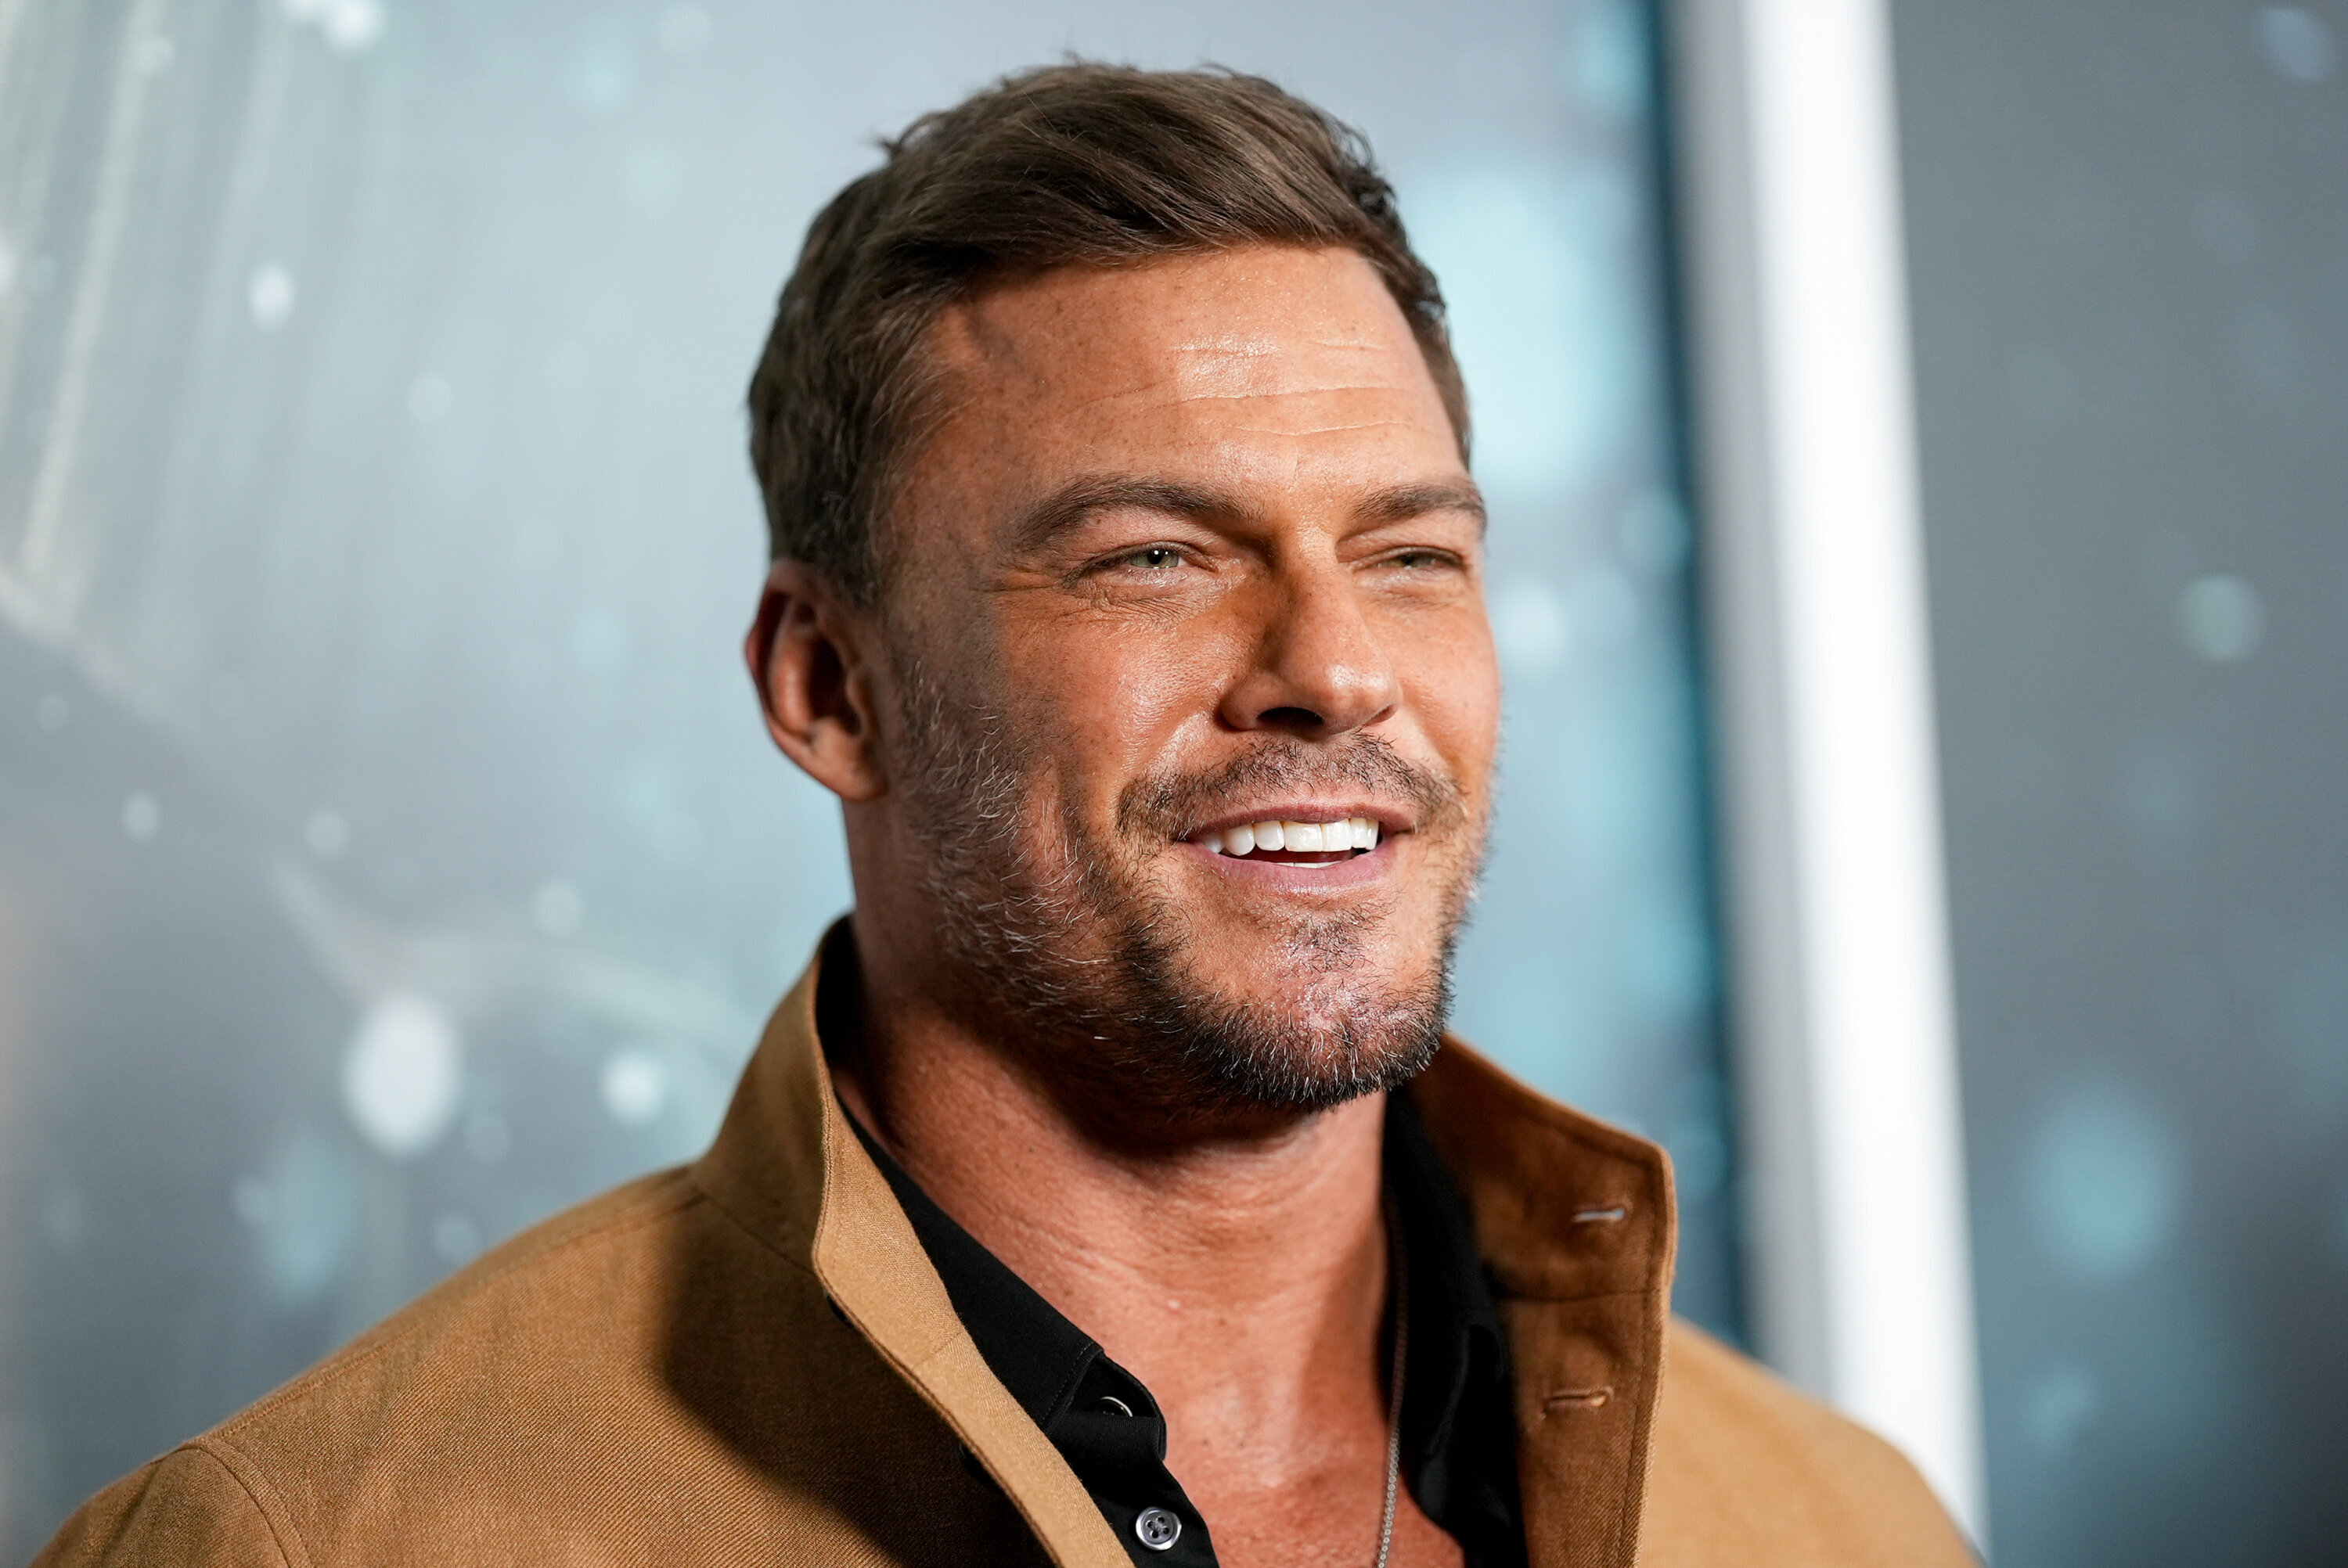 amazon, right-wing 'reacher' fans flip out after alan ritchson calls trump a 'rapist and a con-man'